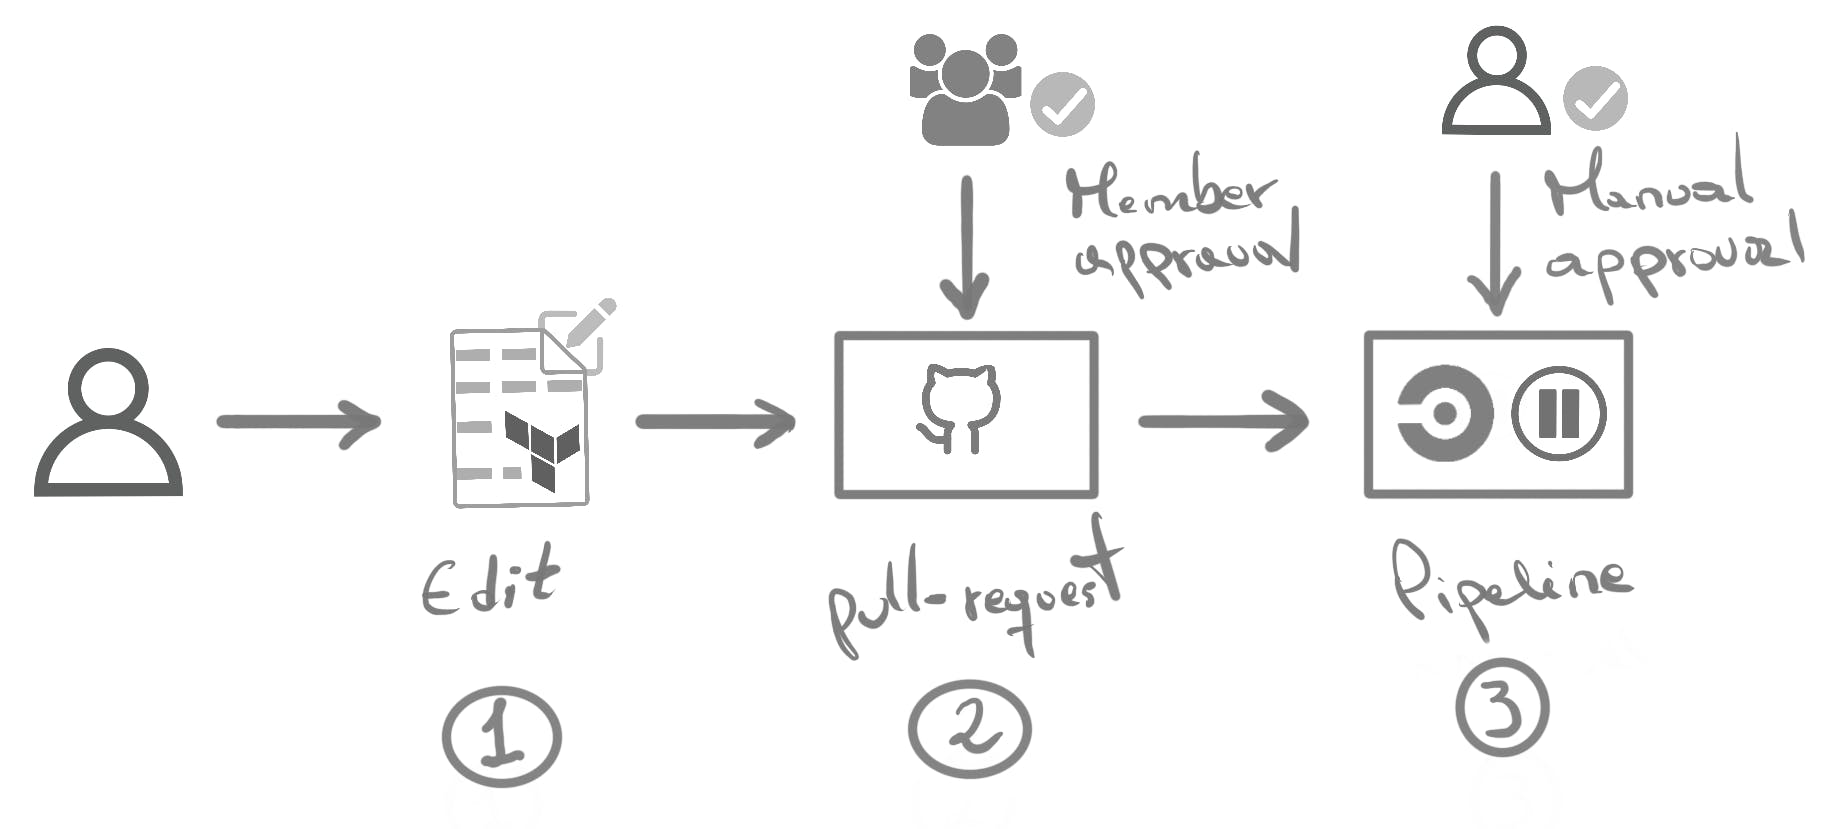 Figure 6: Process for making changes to github resources